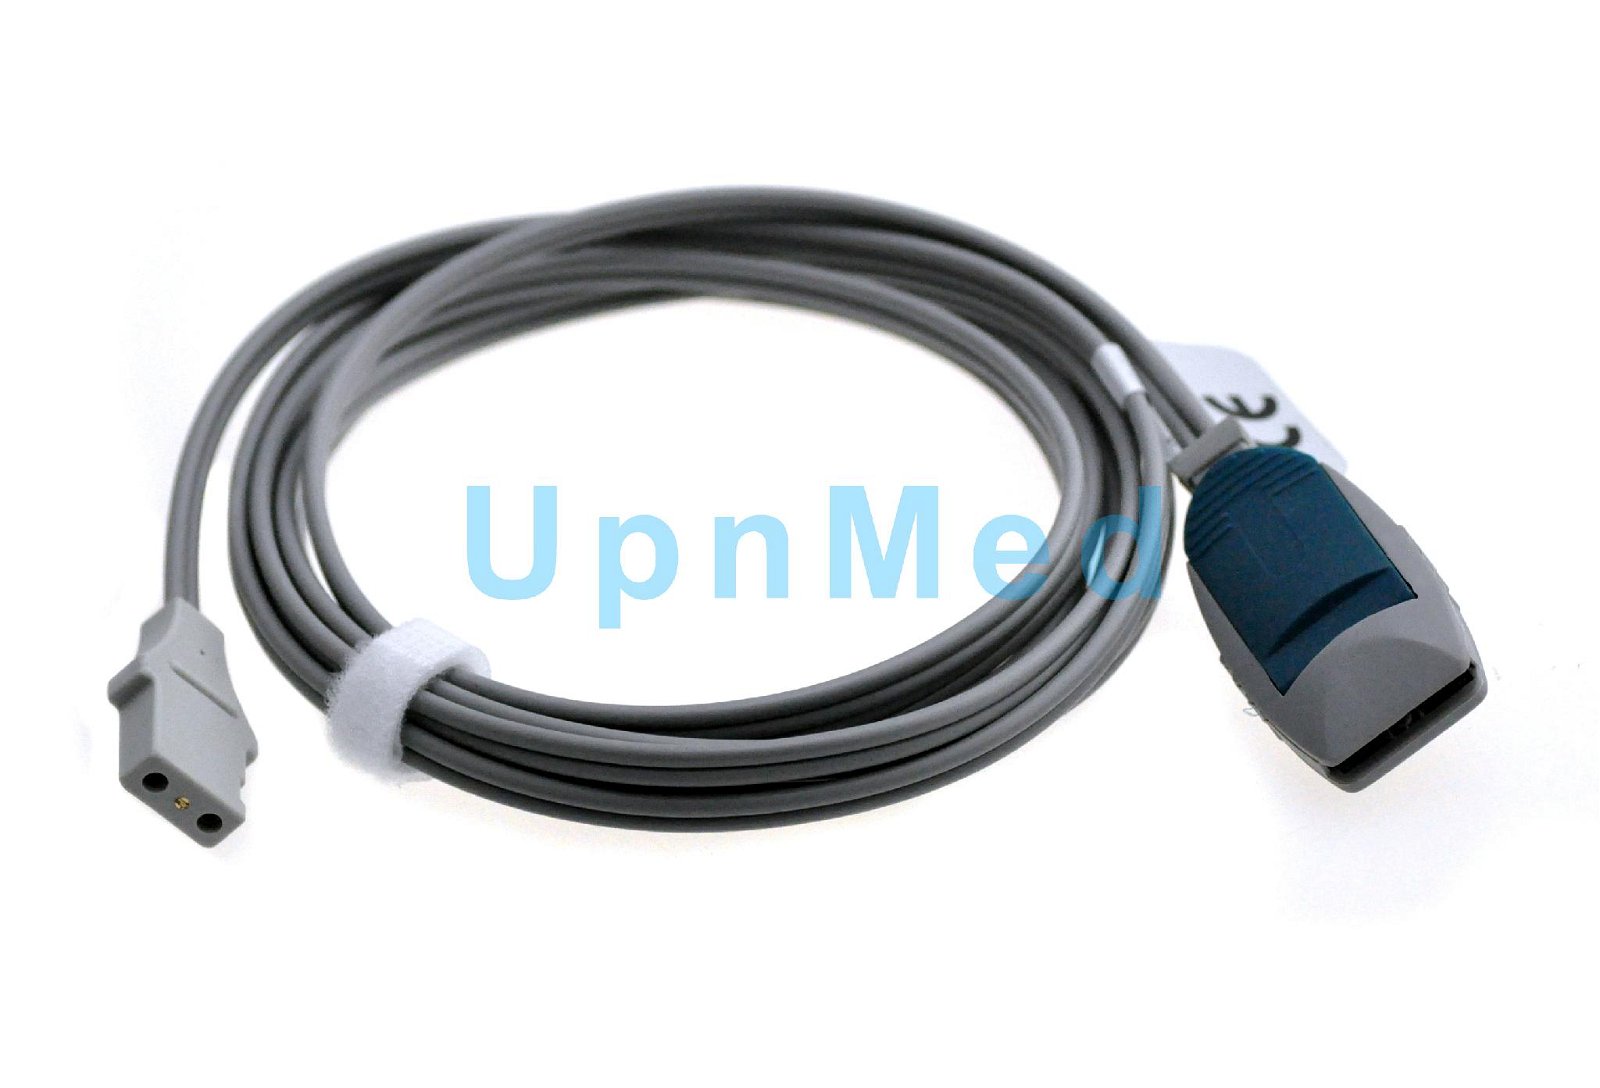 China Reusable patient plate cable for High Frequency